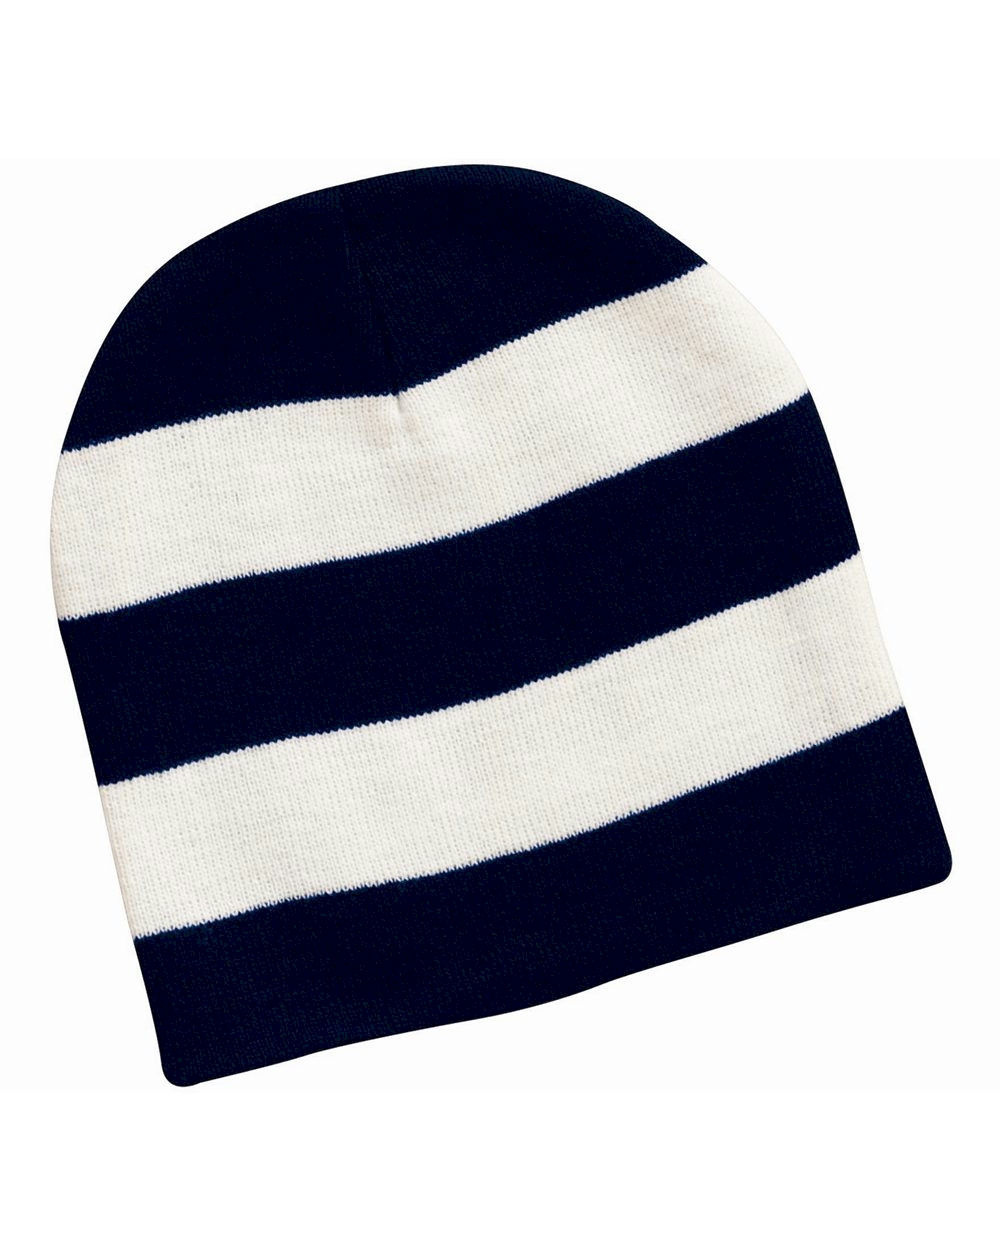 Rugby Striped Knit Beanie Embroidery Blanks - Navy/White